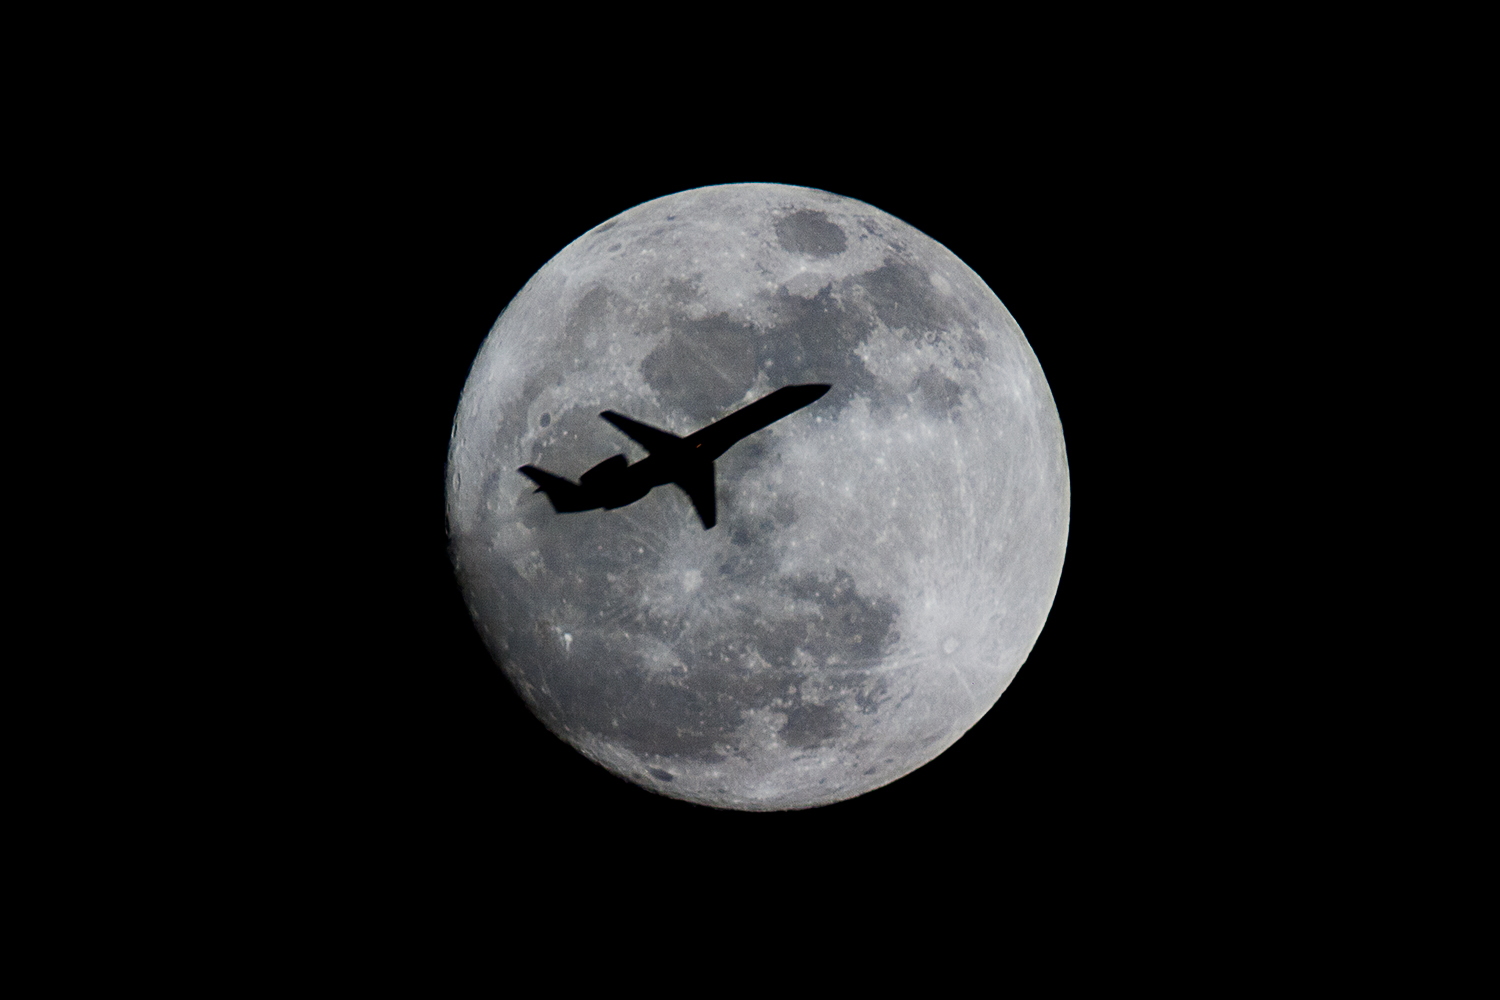 Small plane transiting the moon